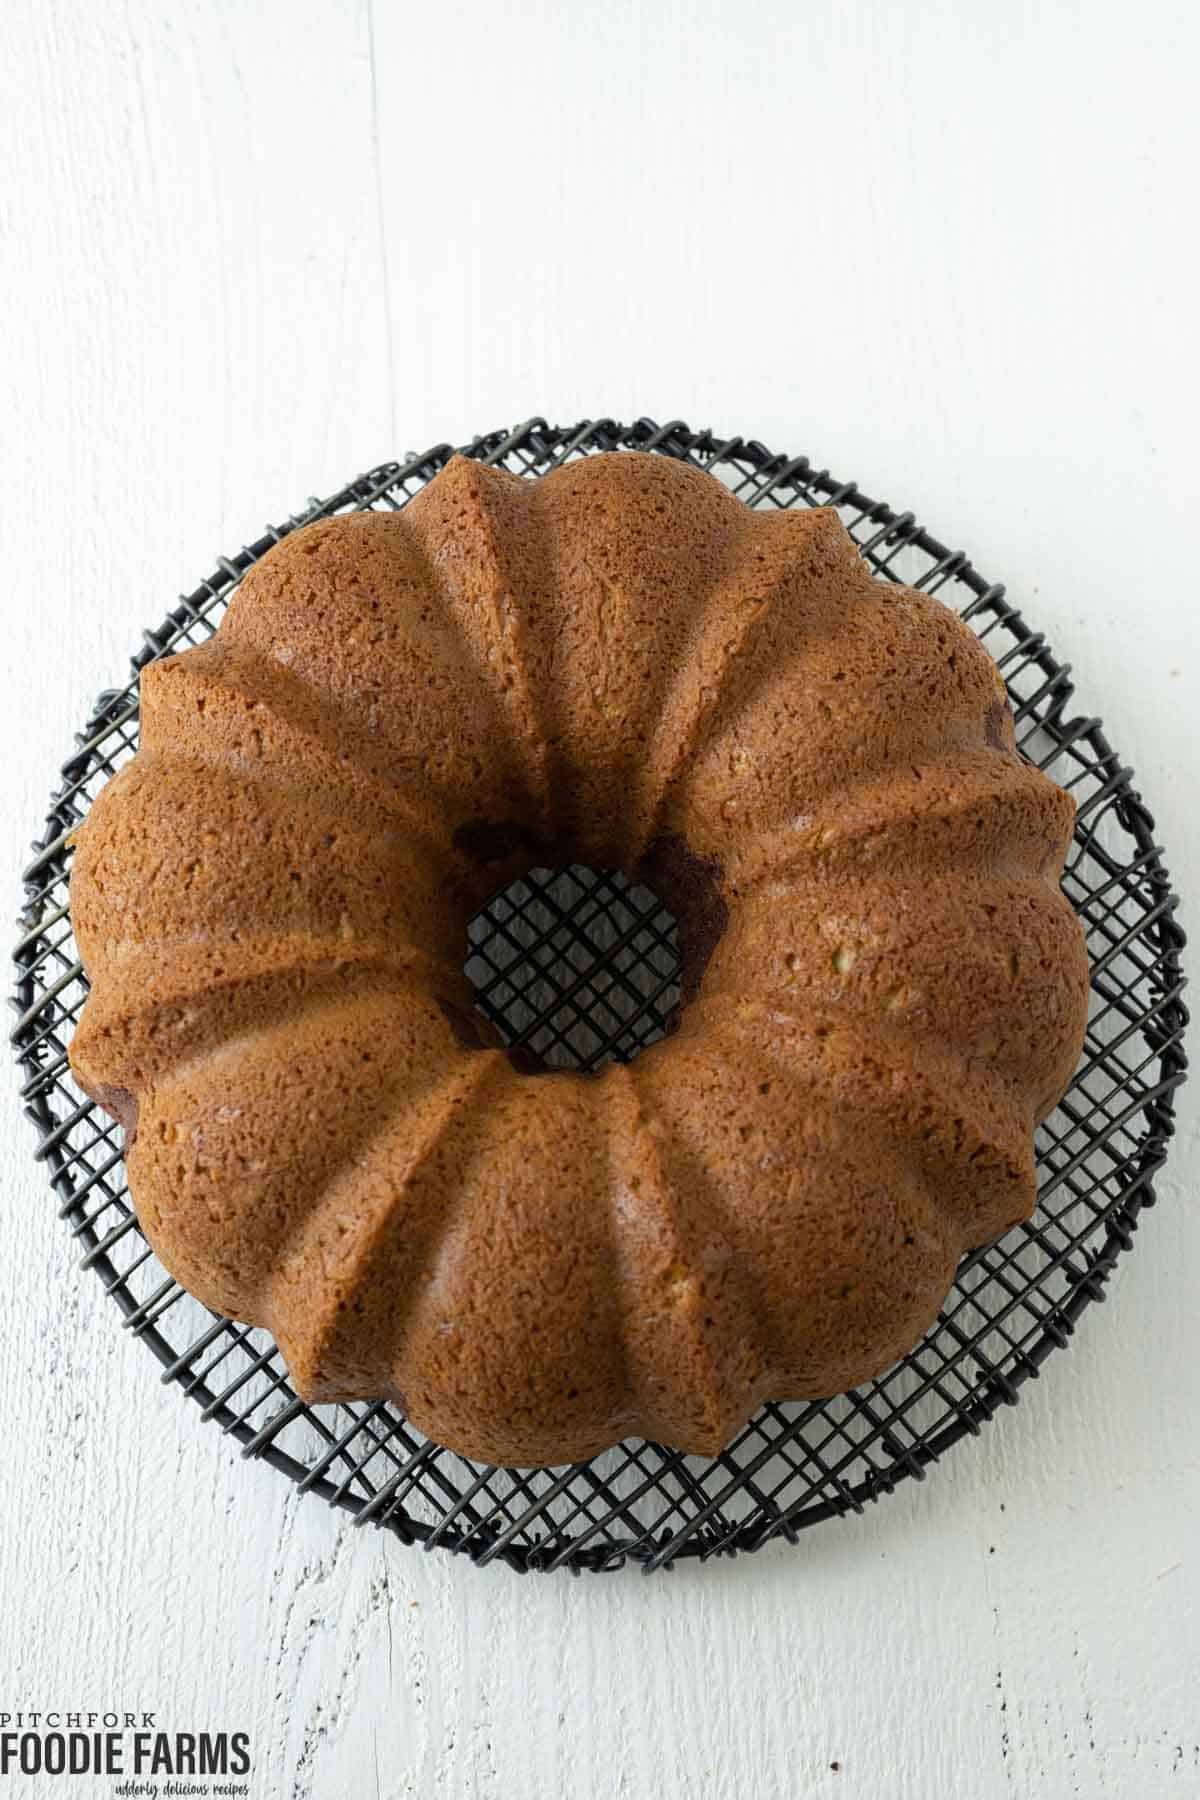 A bundt cake on a wire cooling rack.